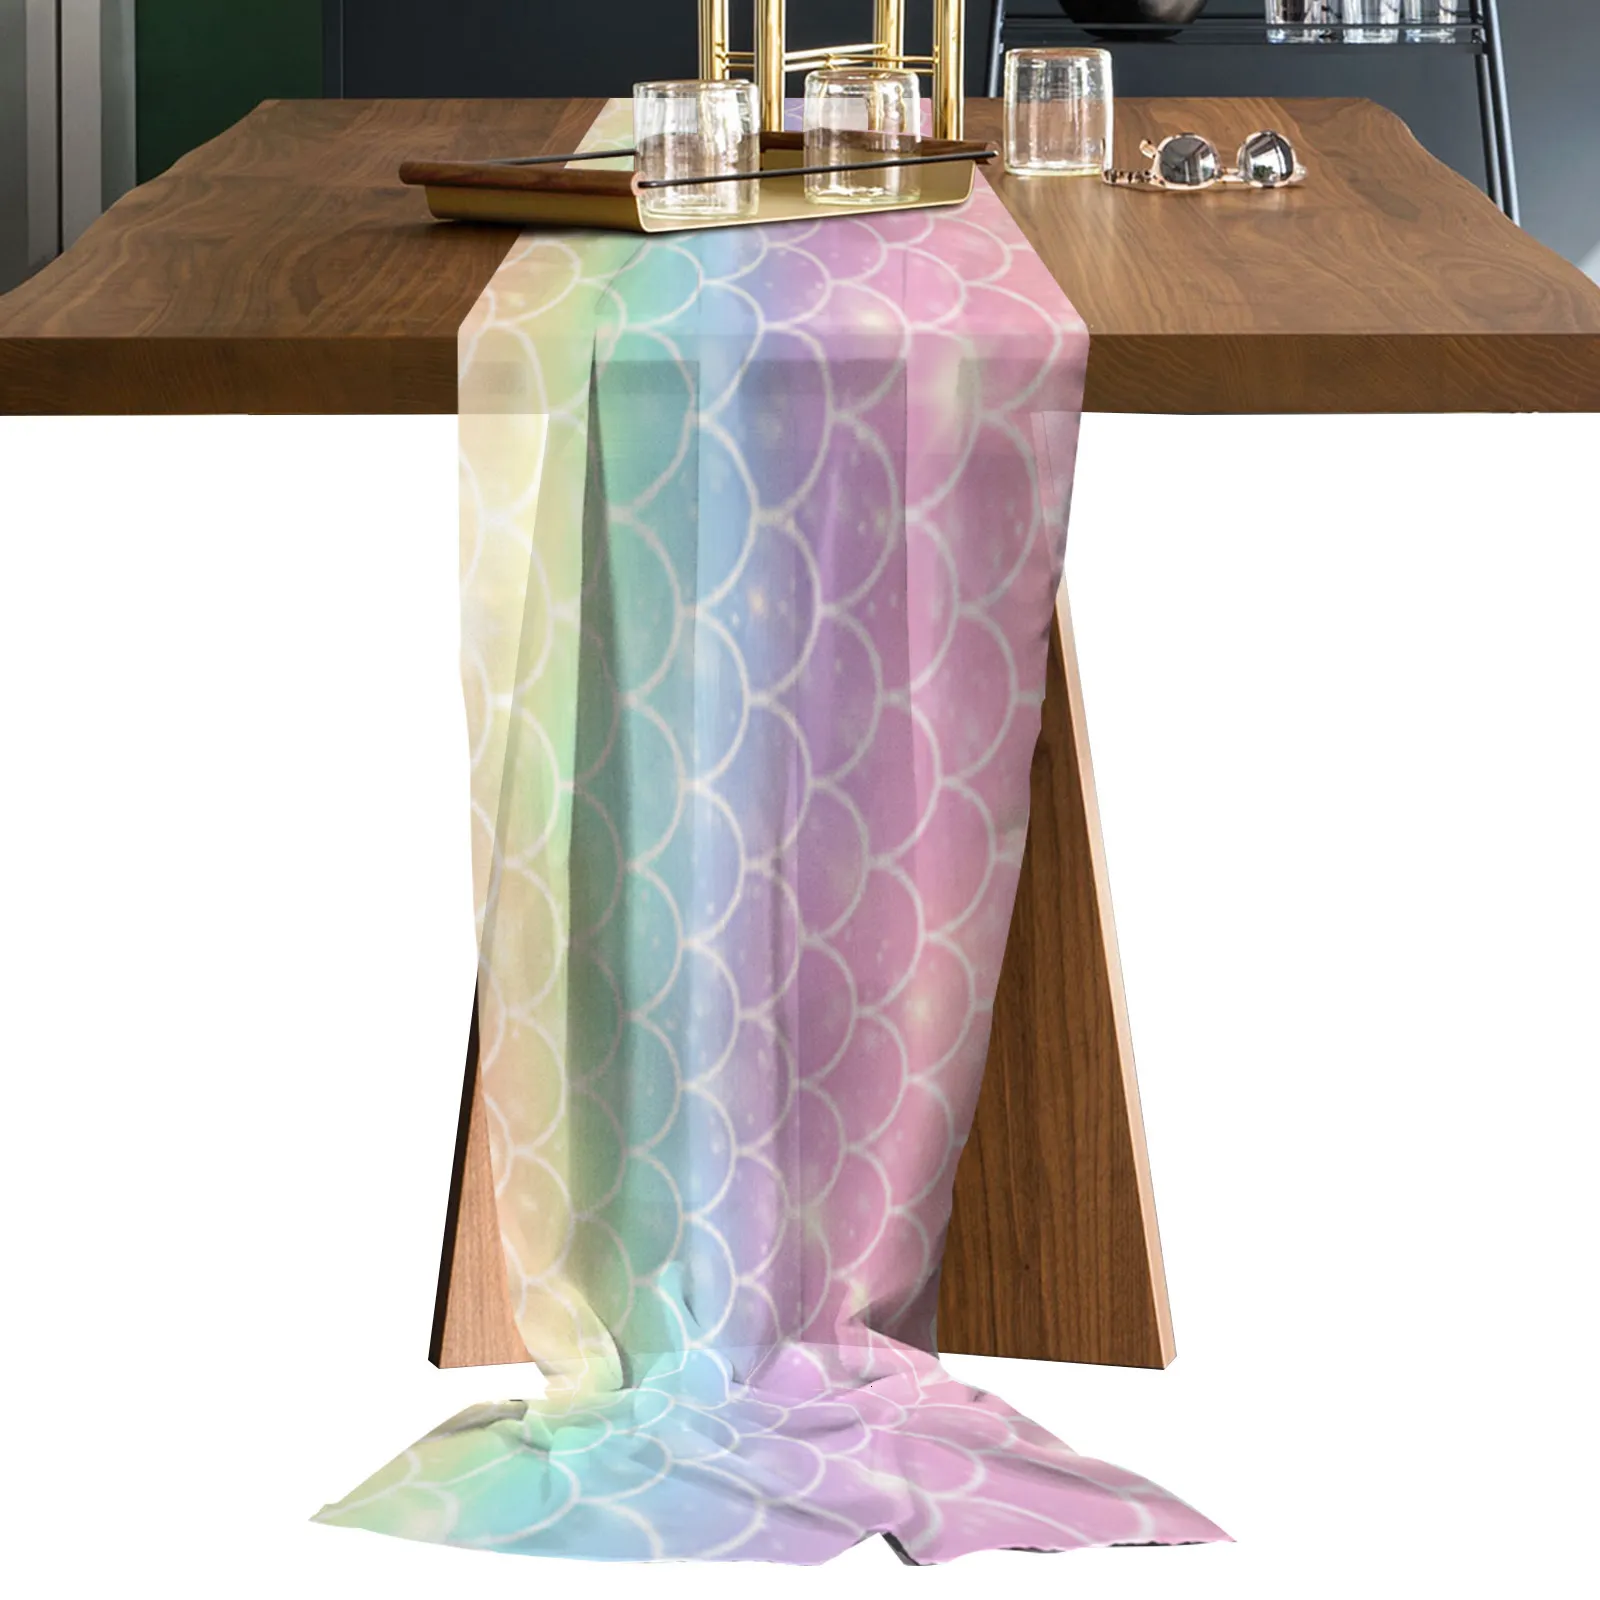 Rainbow Table Runner Mermaid Scales Ocean Rainbow Sheer Chiffon Rainbow  Table Runner Country Wedding Party Birthday Tulle Voile Table Cloth Home  Decoration 230322 From Kong08, $16.4